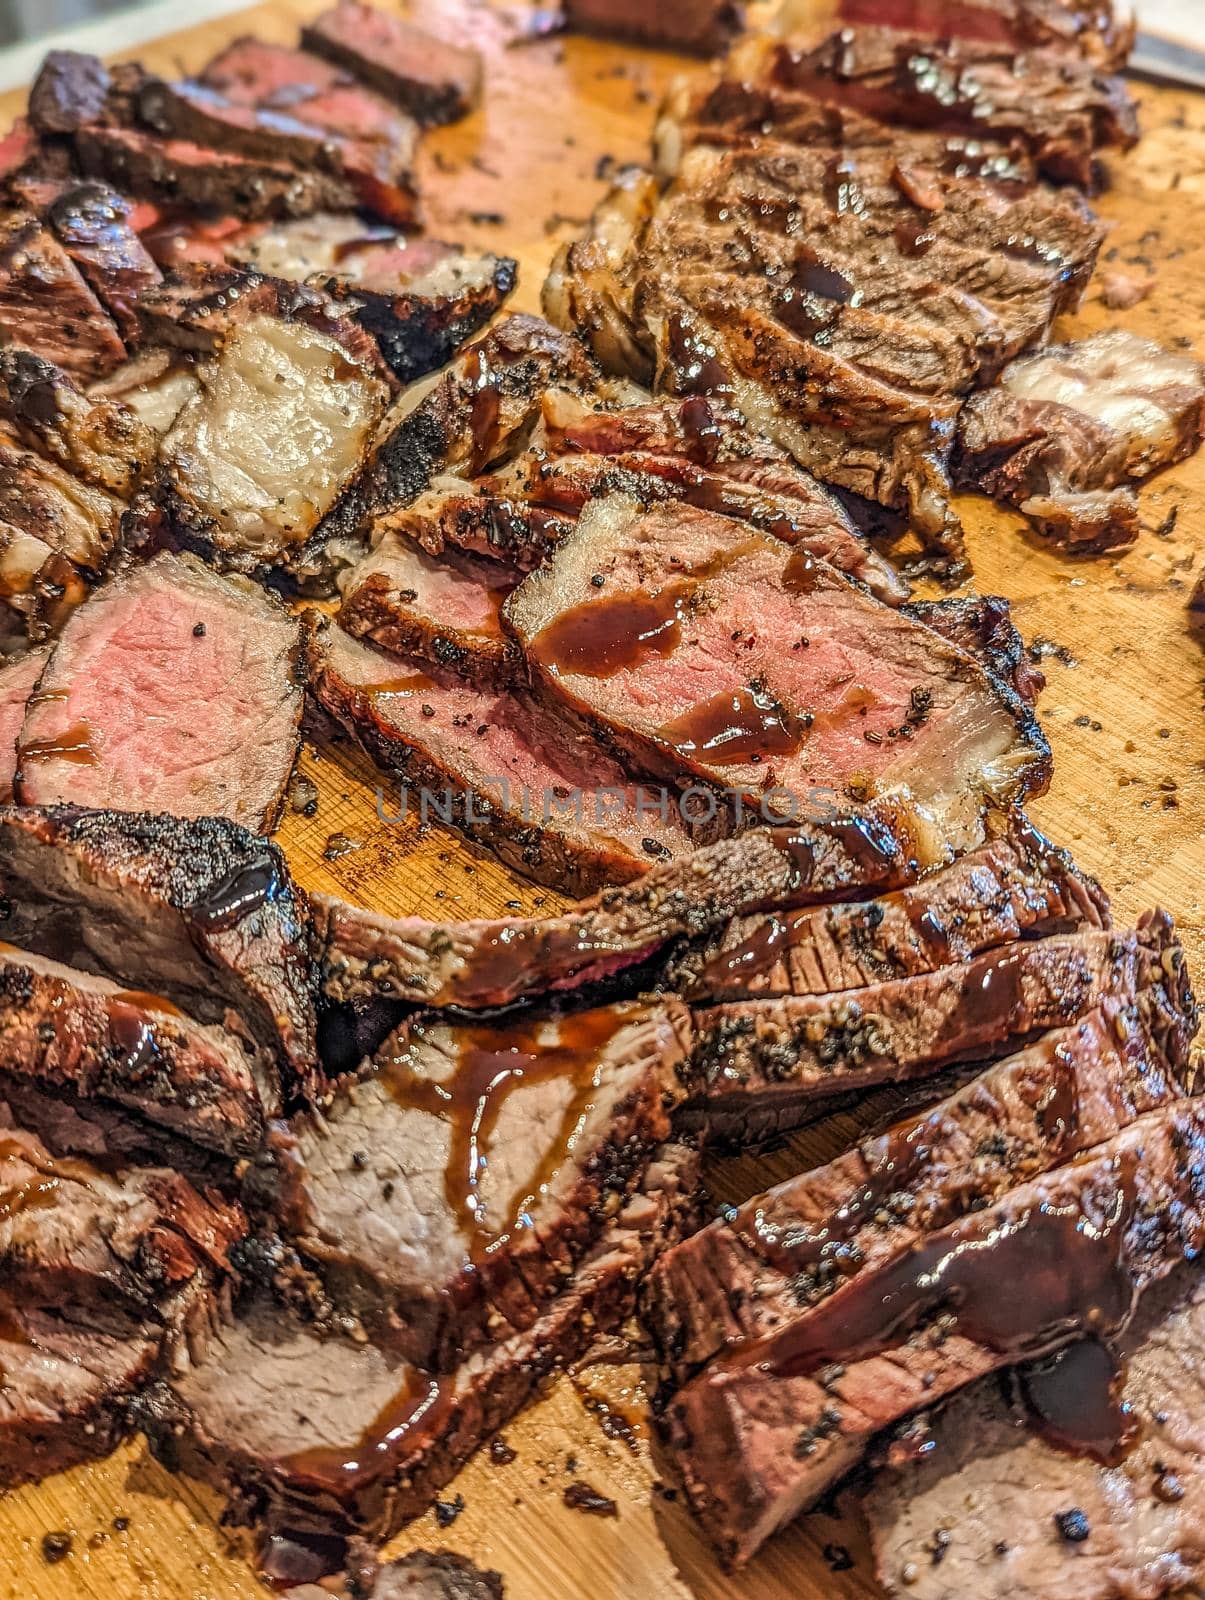 cooked and sliced to perfection 30 day dry aged ny strip beef and bison ribeye by digidreamgrafix